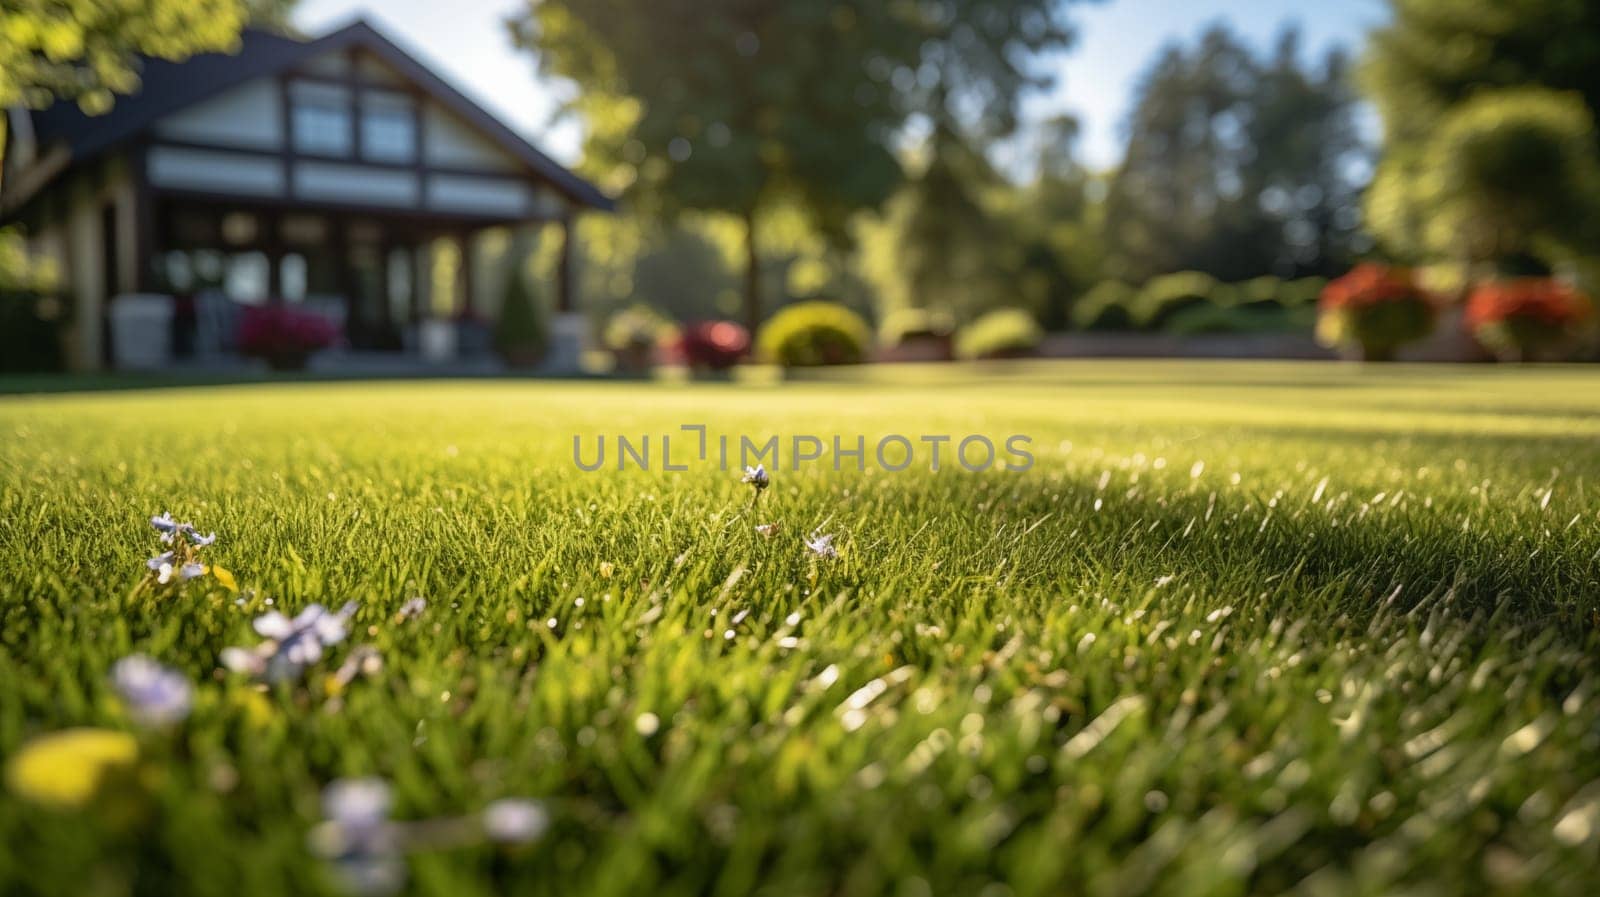 Close-up of fresh green grass with tiny wildflowers in the foreground, with a blurred house in the serene background. Place for your product